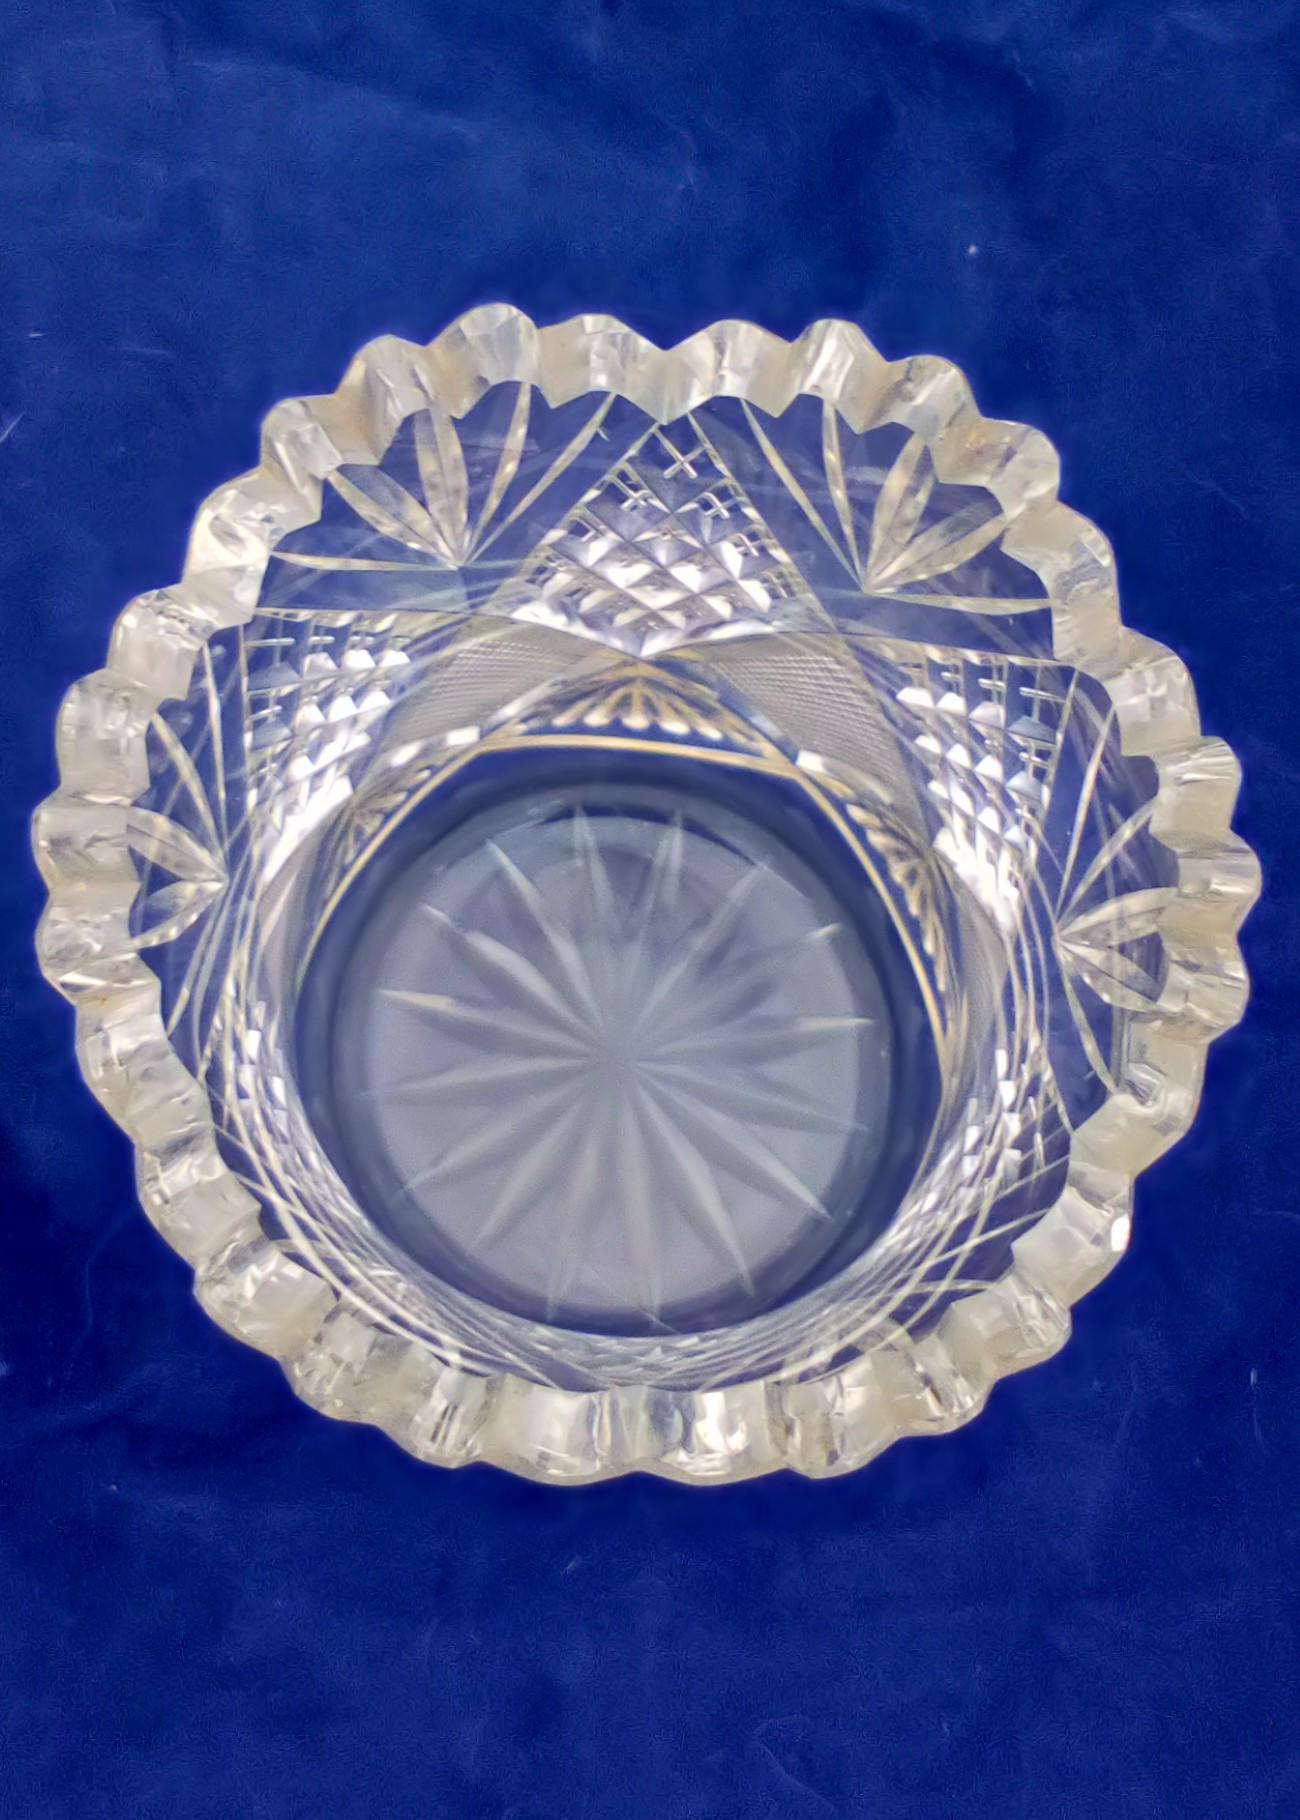 An antique Edwardian fan cut glass small celery vase with hobnail and strawberry diamond cutting star cut base circa 1910